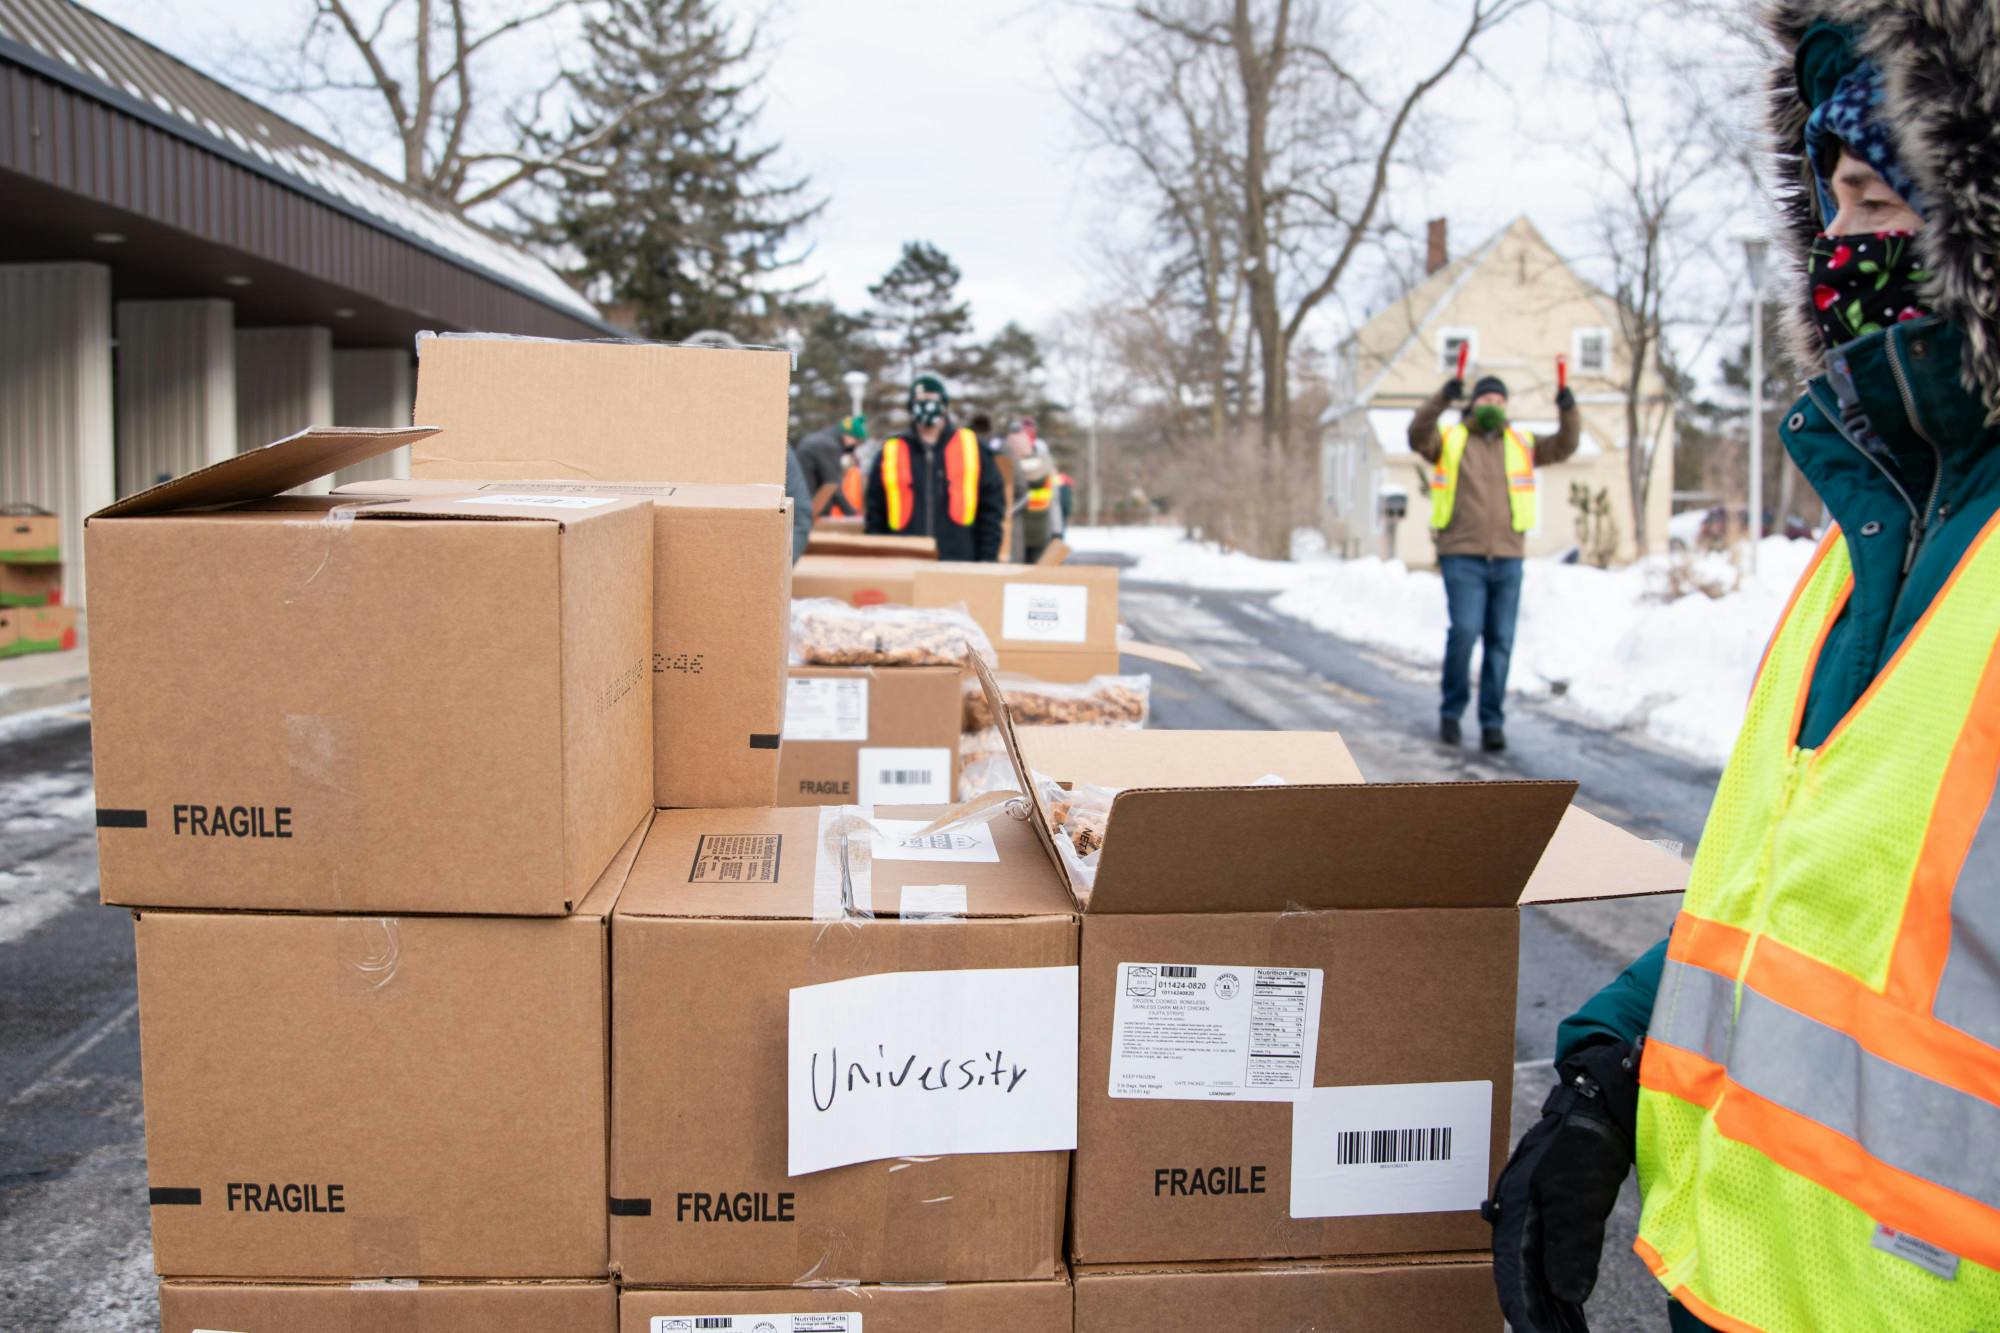 Katie Hanson, a member of the United Methodist Church-University,  volunteers at a Greater Lansing Food Bank distribution at the University Lutheran Church on Jan. 28, 2021. "It's a way we can contribute and do so safely."